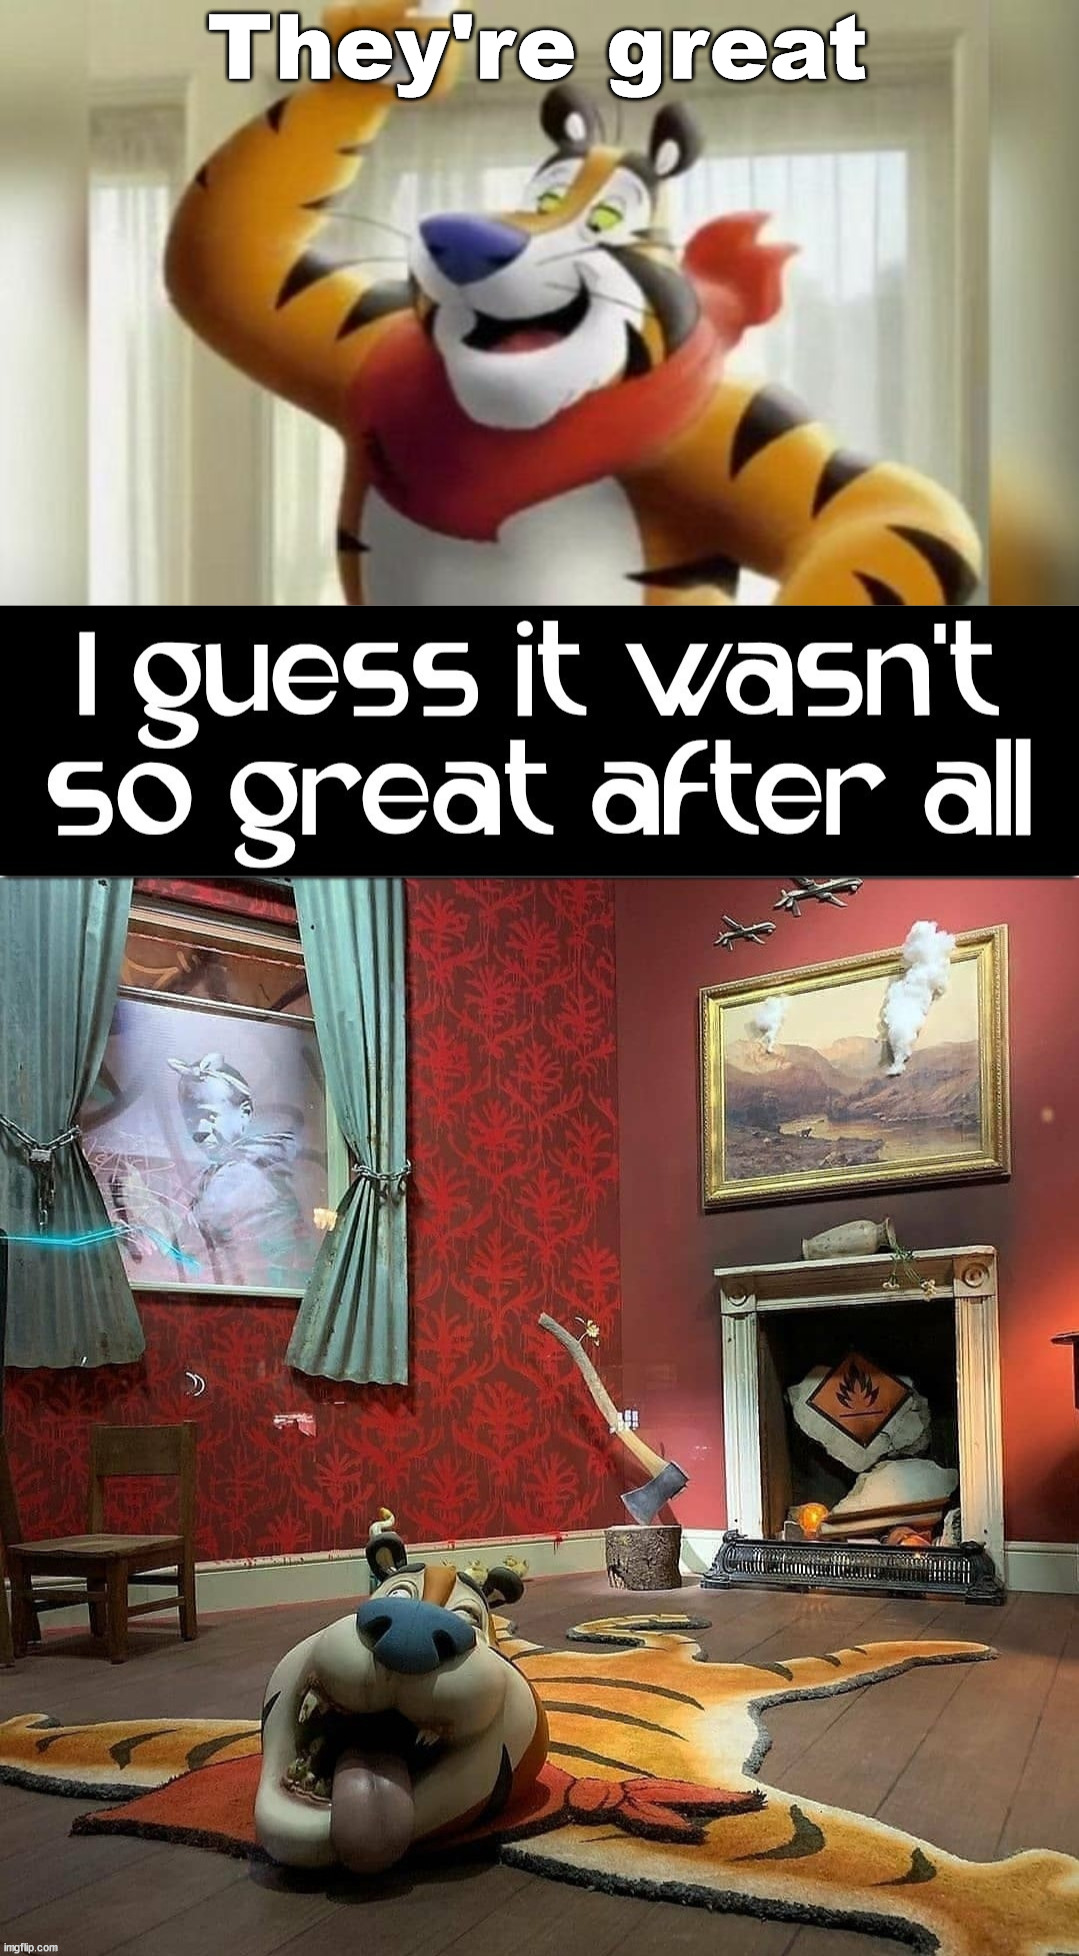 They're great | image tagged in tony the tiger great,dark humor | made w/ Imgflip meme maker